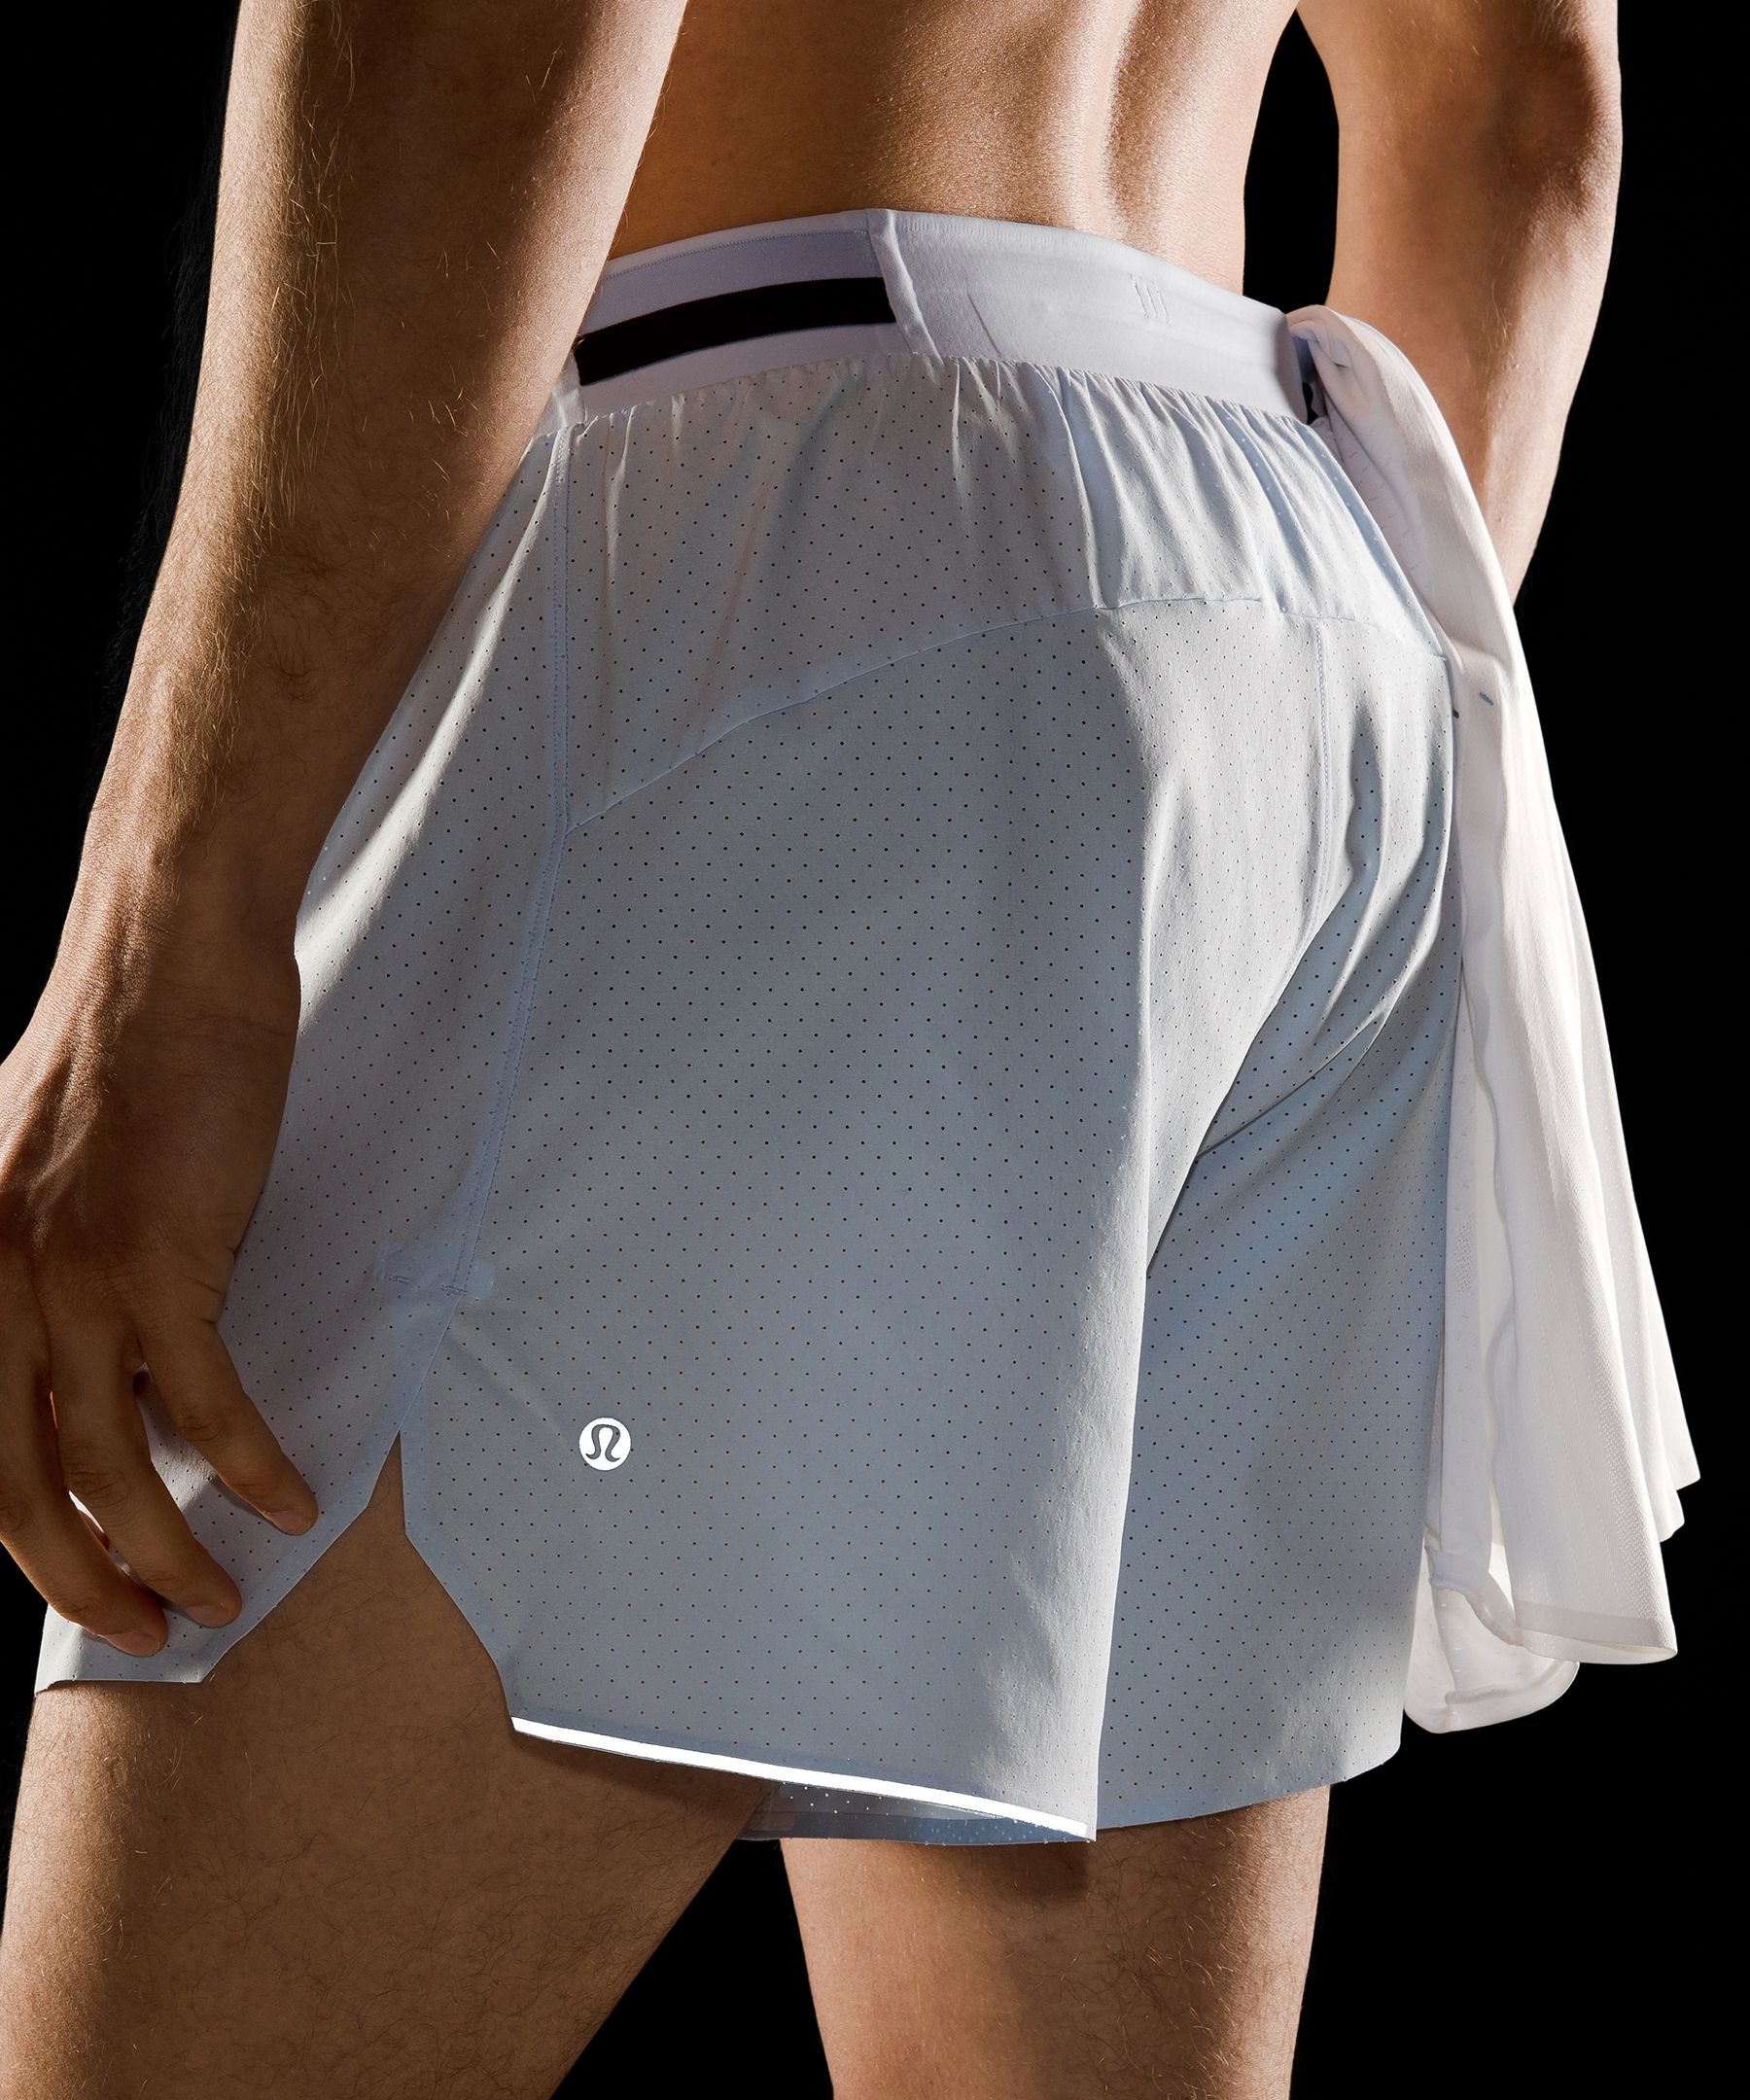 Fast and Free Linerless Short 6" | Men's Shorts